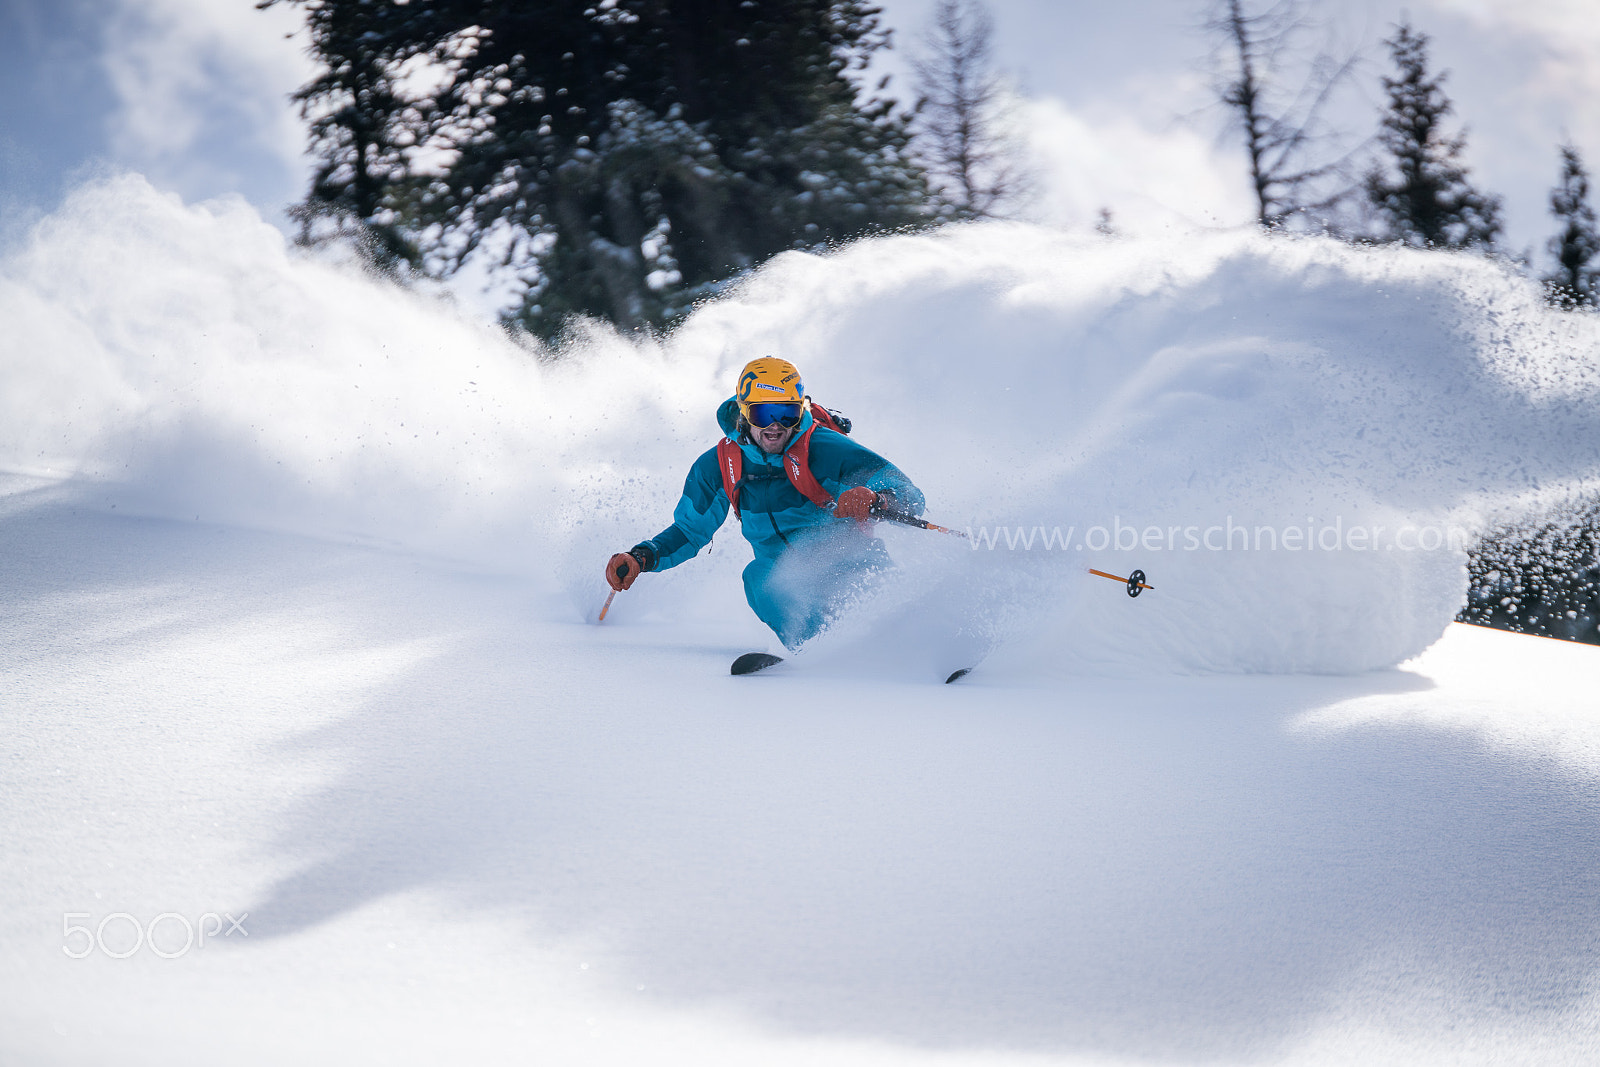 Sony a99 II sample photo. Powder skiing in the alps #1 photography